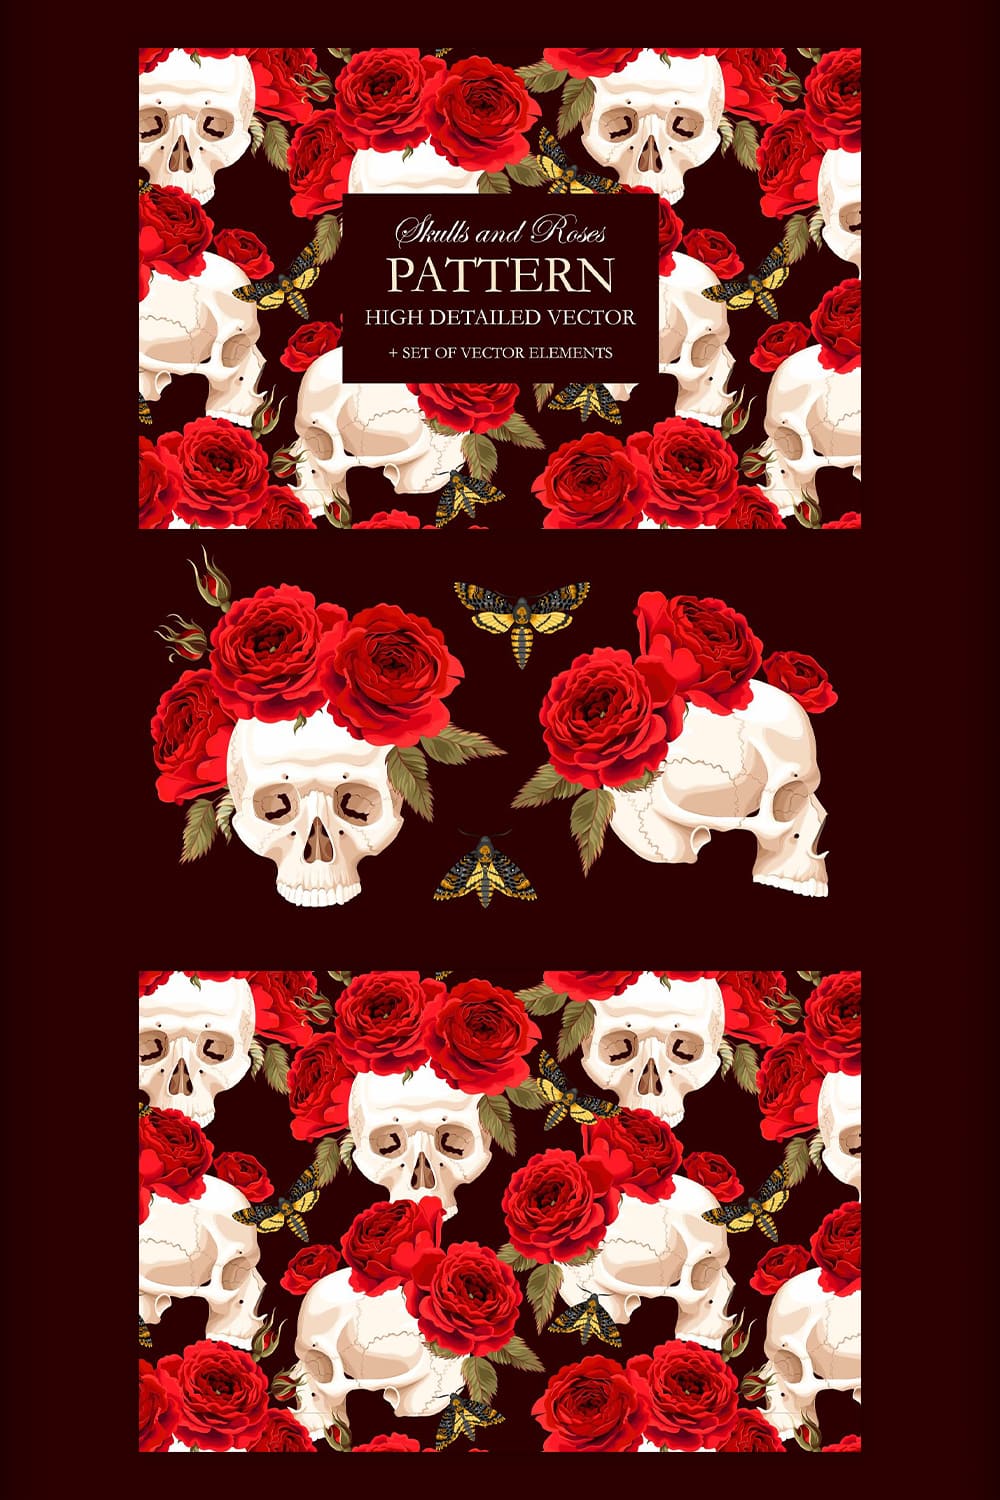 pattern with skulls and roses for your ideas.